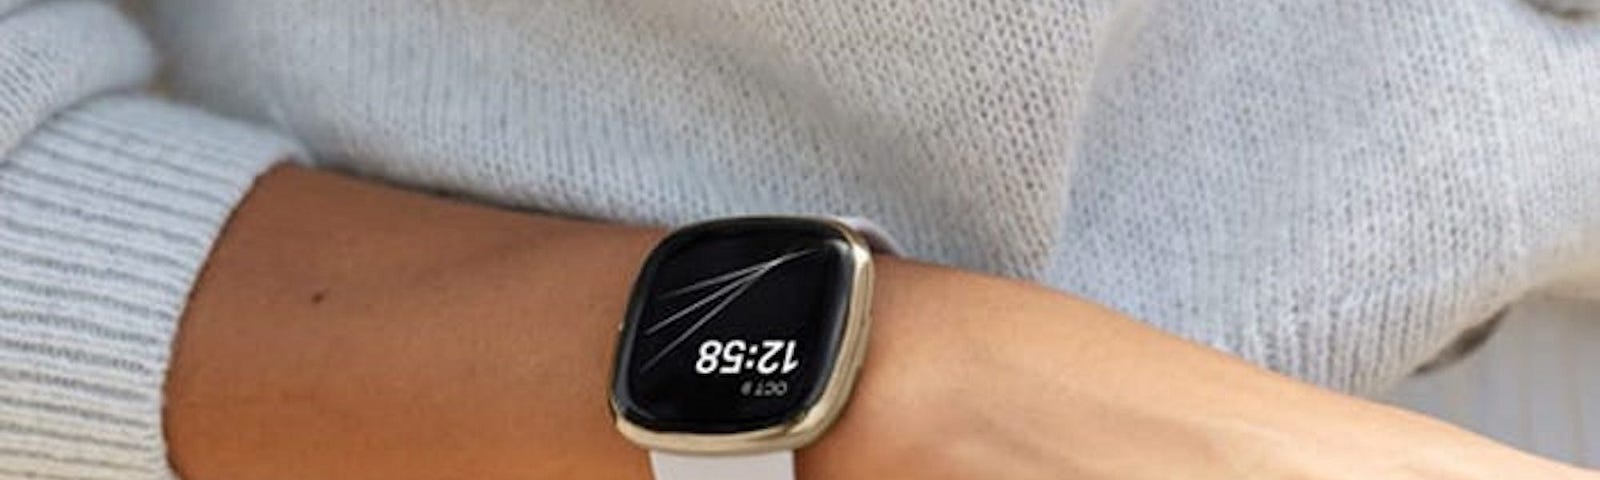 A person wearing a Fitbit on their wrist.